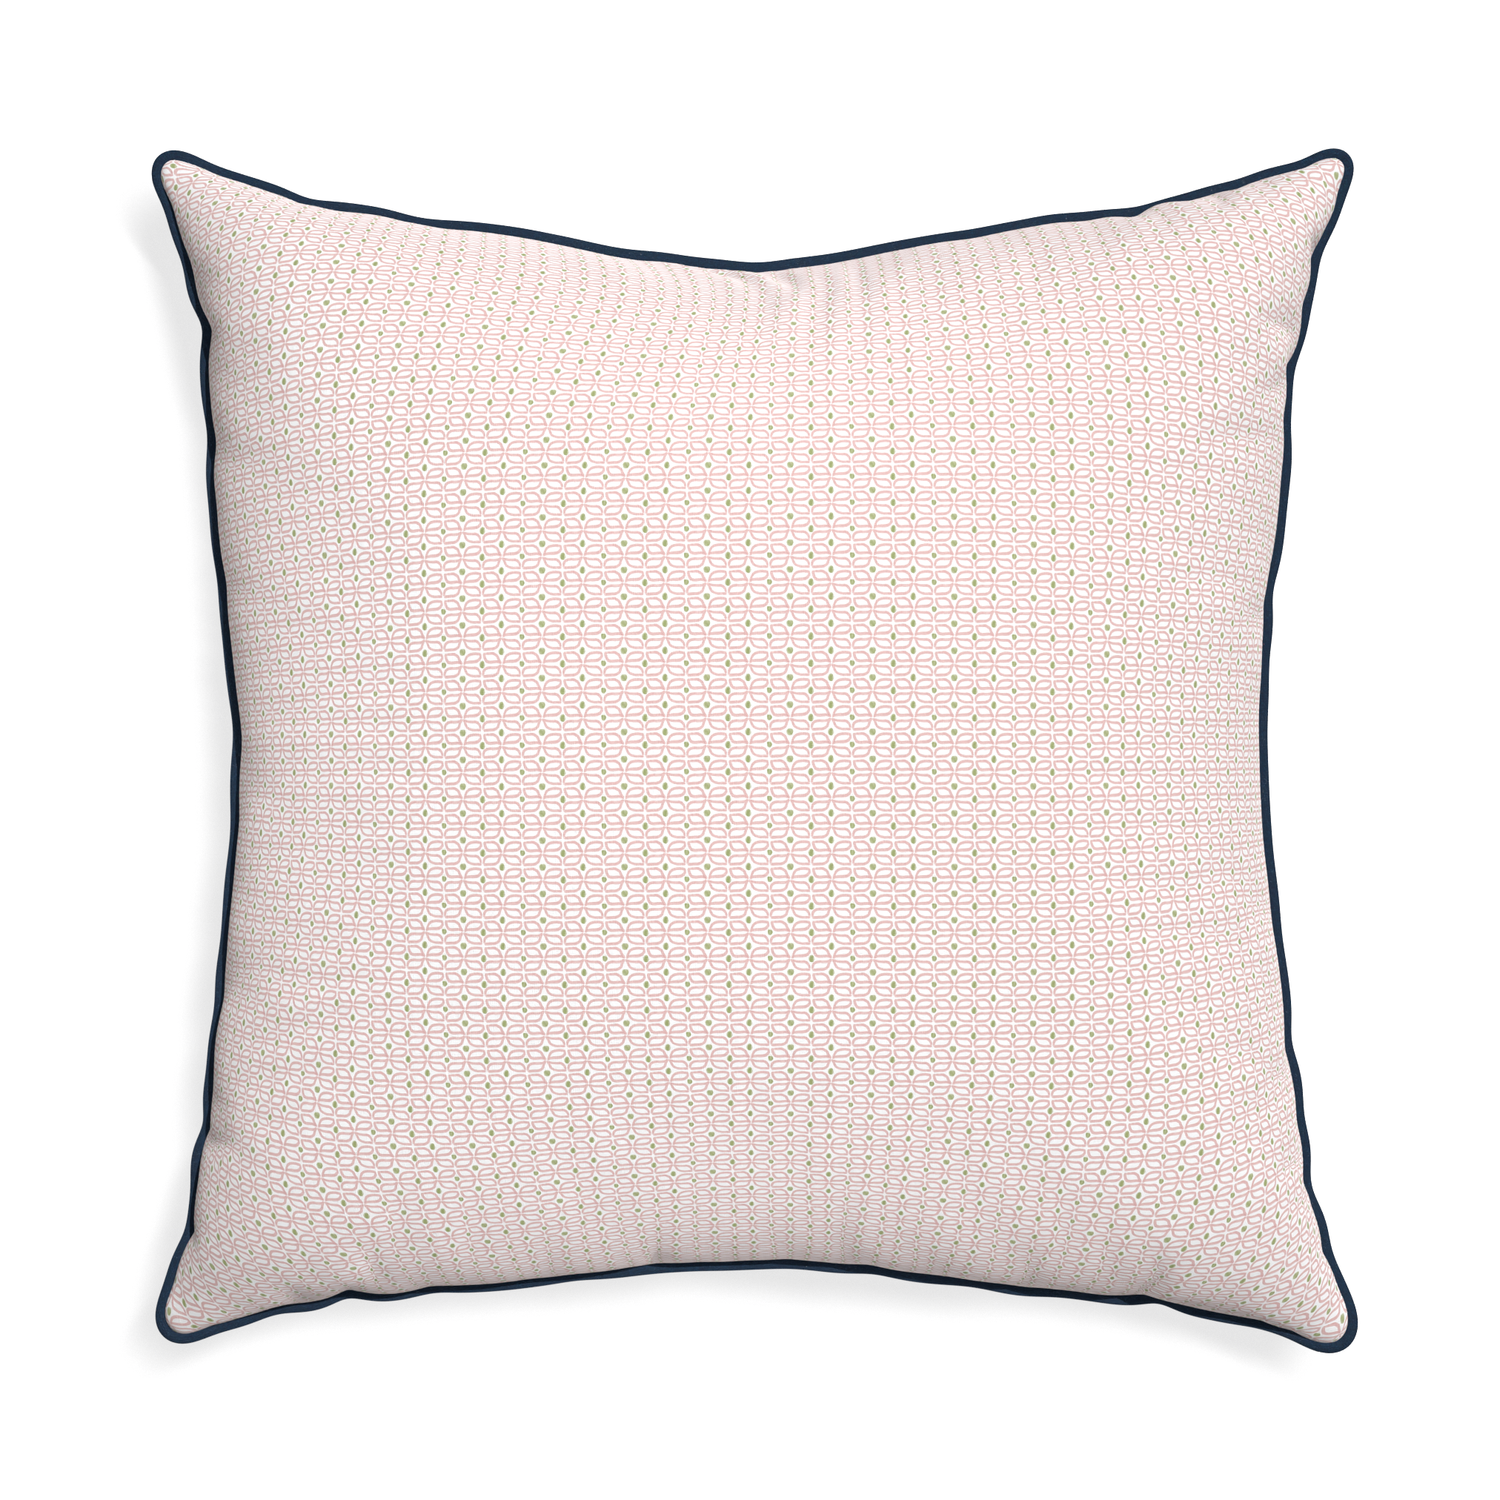 Euro-sham loomi pink custom pink geometricpillow with c piping on white background